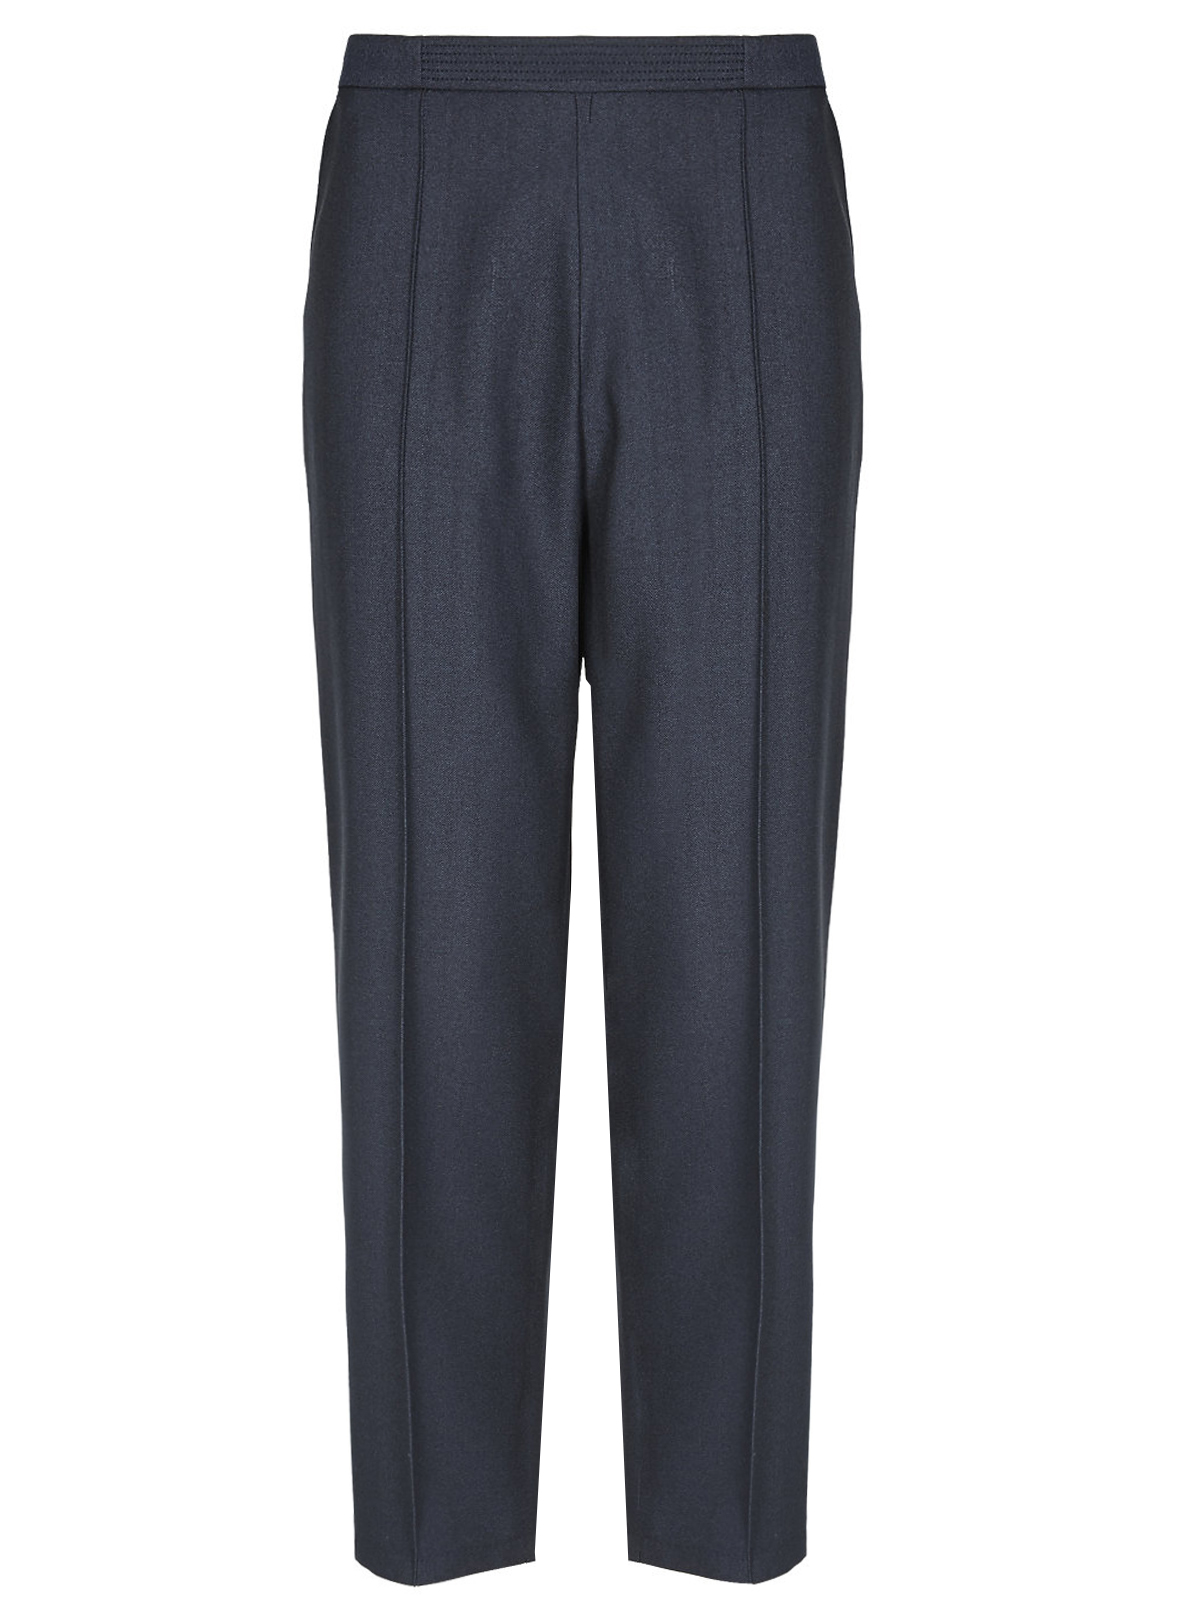 Marks and Spencer - - M&5 NAVY Textured Pull On Trousers - Size 8